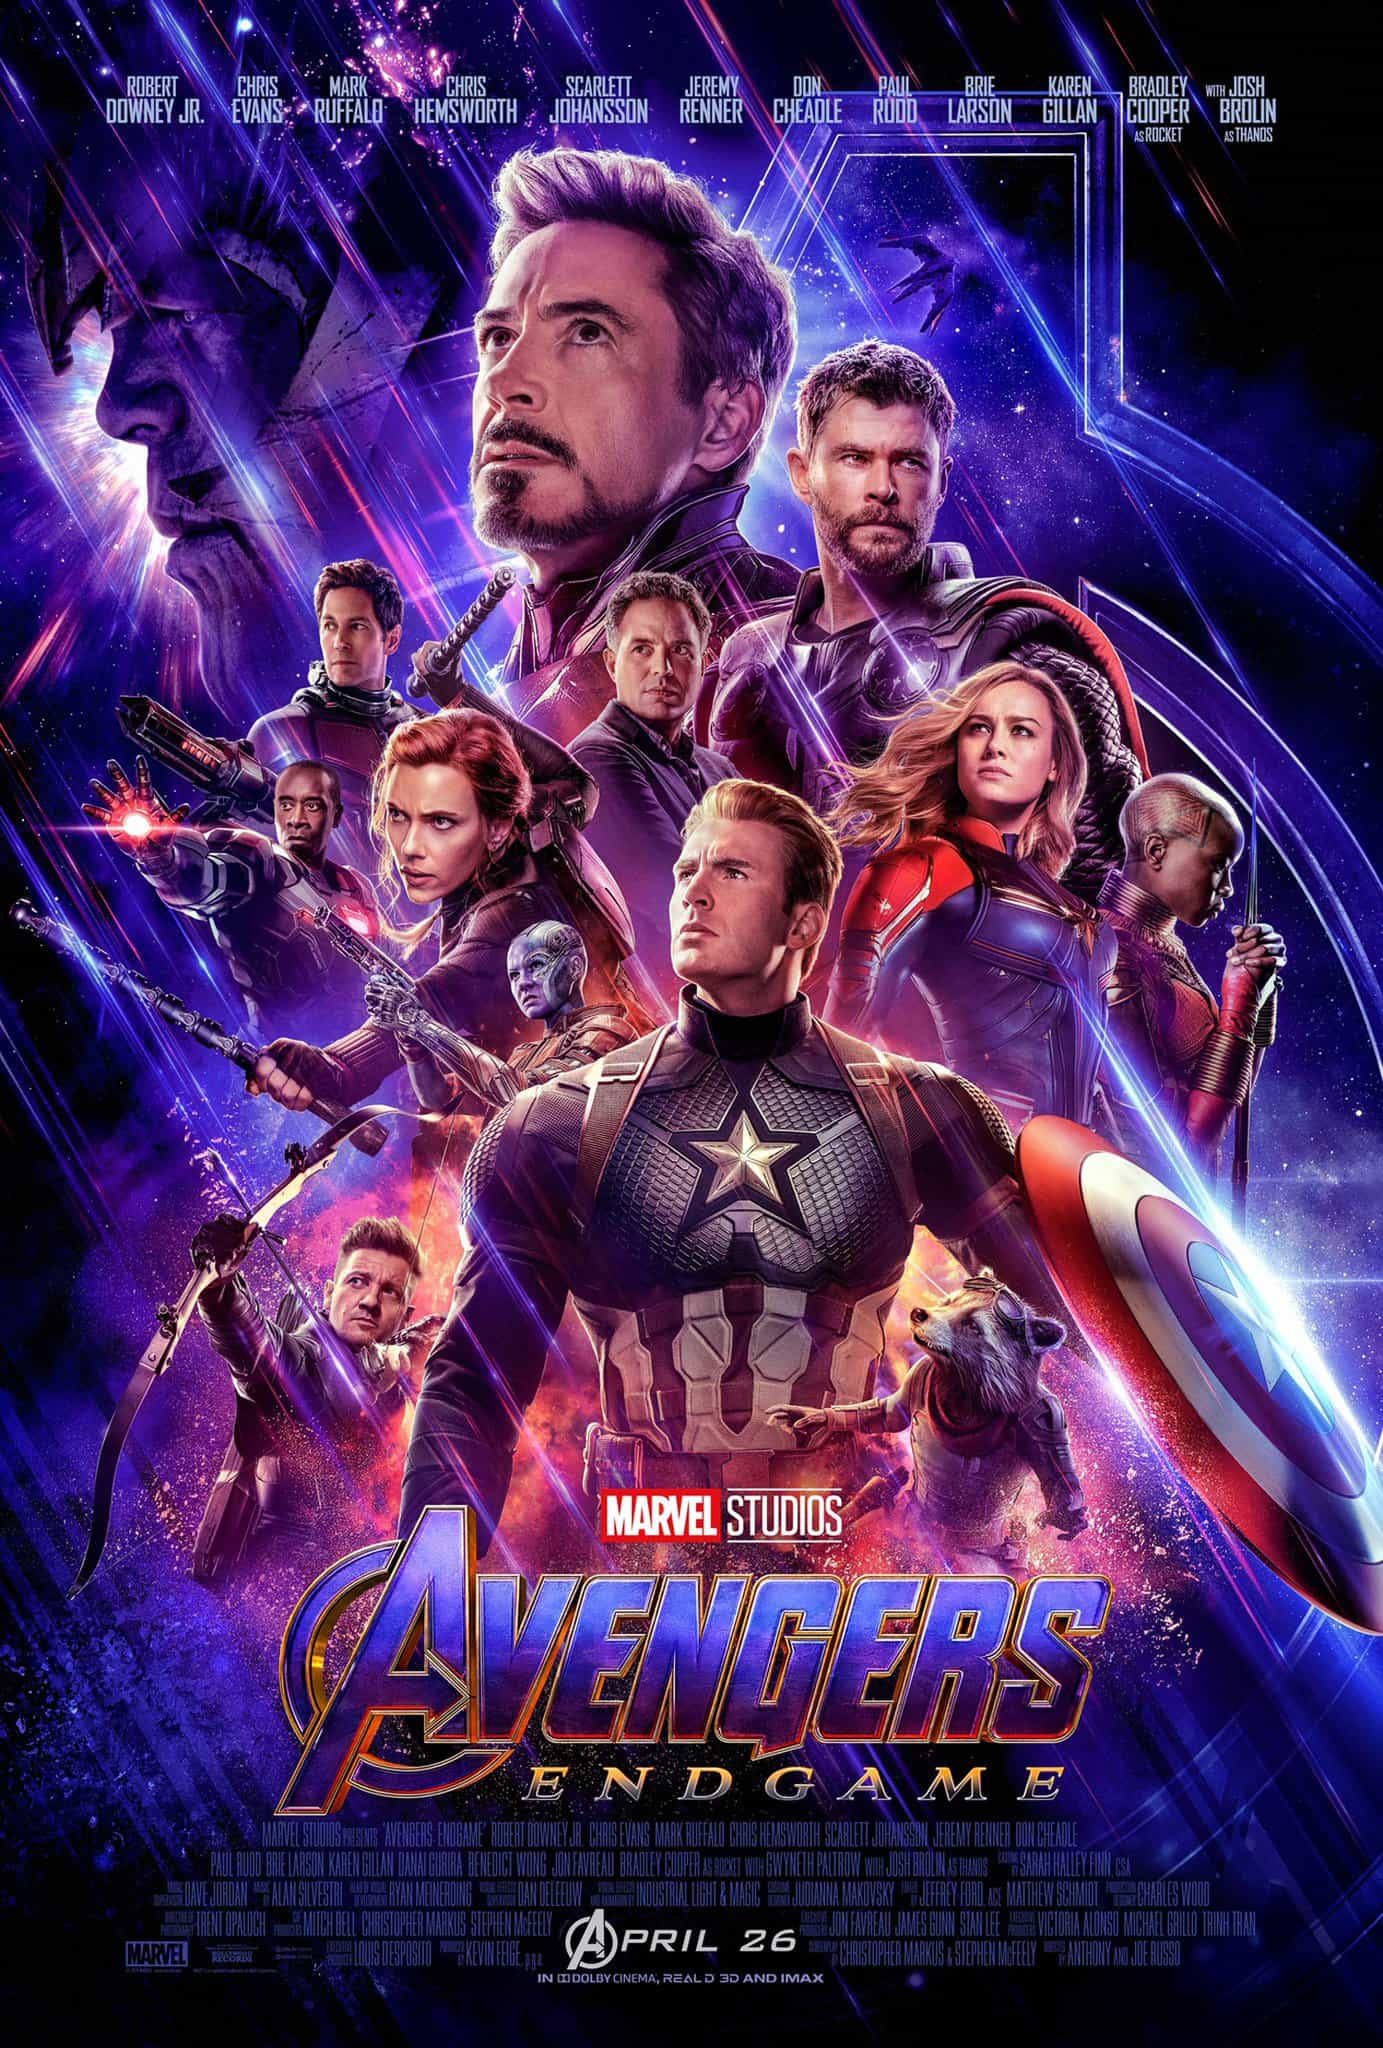 Global Box Office Figures 3rd - 5th May 2016:  Avengers Endgame continues to dominate world cinema on its second weekend with Long Shot highest new film